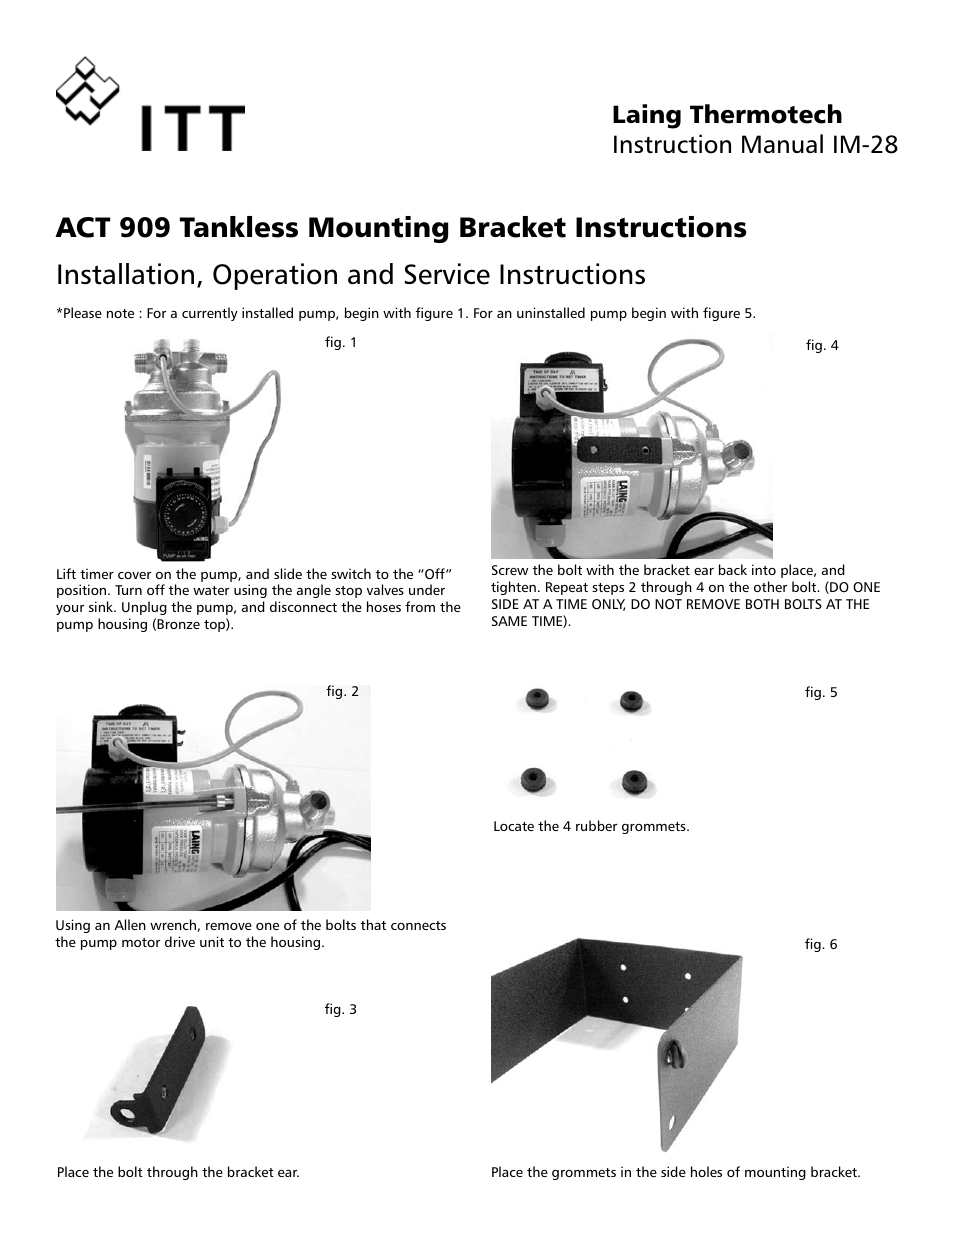 IM 28 ACT 909 Tankless Mounting Bracket Instructions (obsolete)